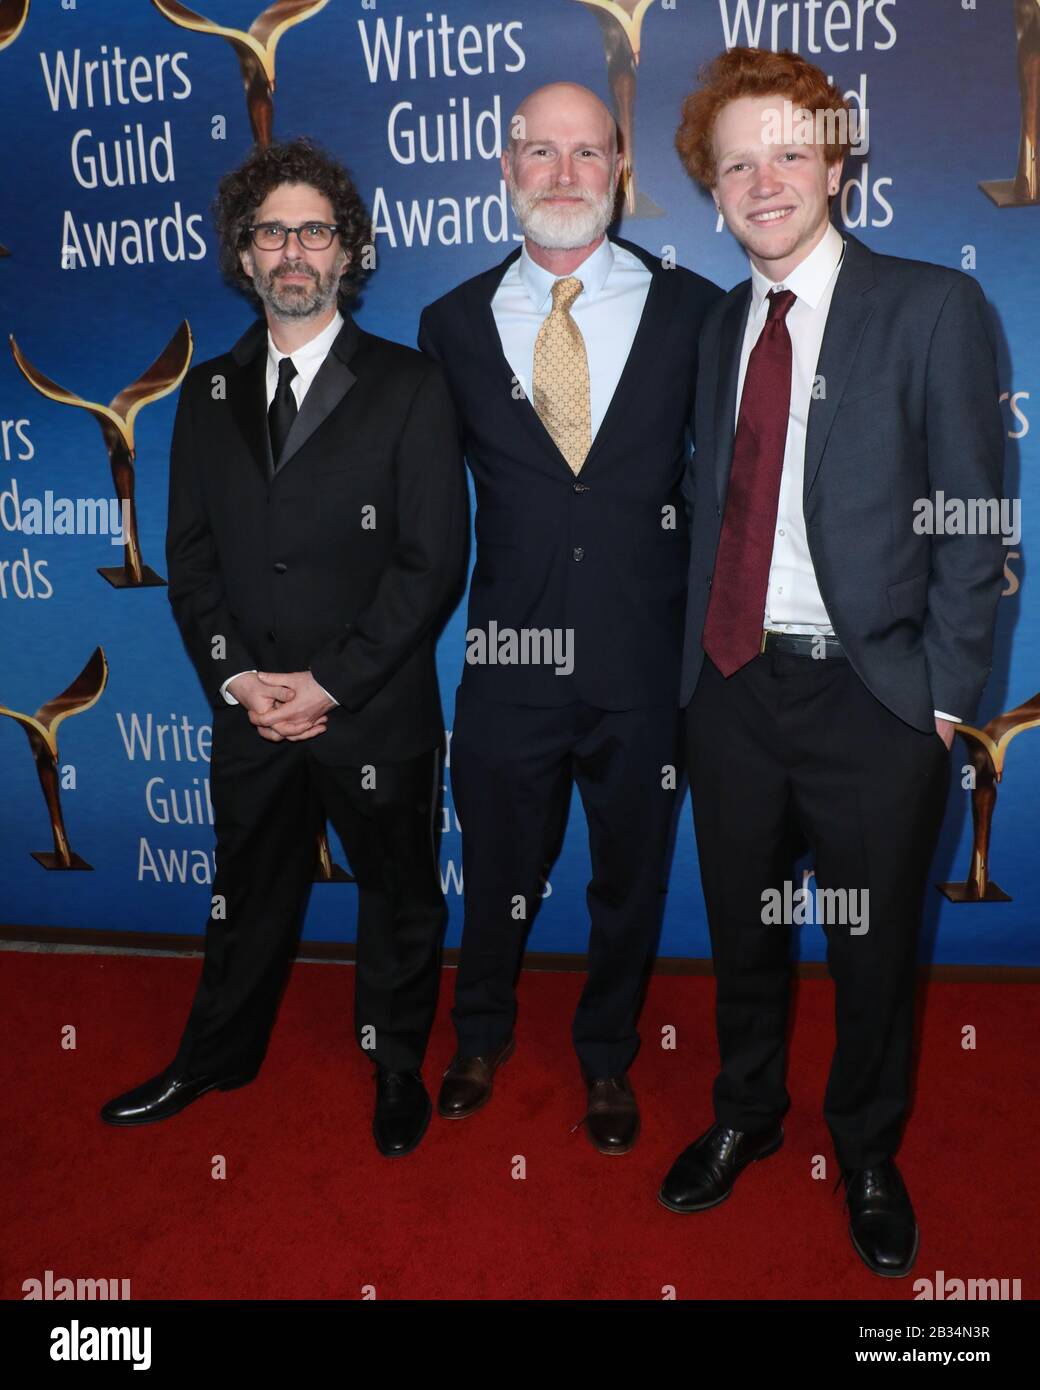 Writers Guild Awards 2020 - West Coast Ceremony Arrivals at the Beverly Hilton Hotel in Beverly Hills, California on February 1, 2020 Featuring: Joshua Marston, David Hollander, Clay Hollander Where: Beverly Hills, California, United States When: 01 Feb 2020 Credit: Sheri Determan/WENN.com Stock Photo